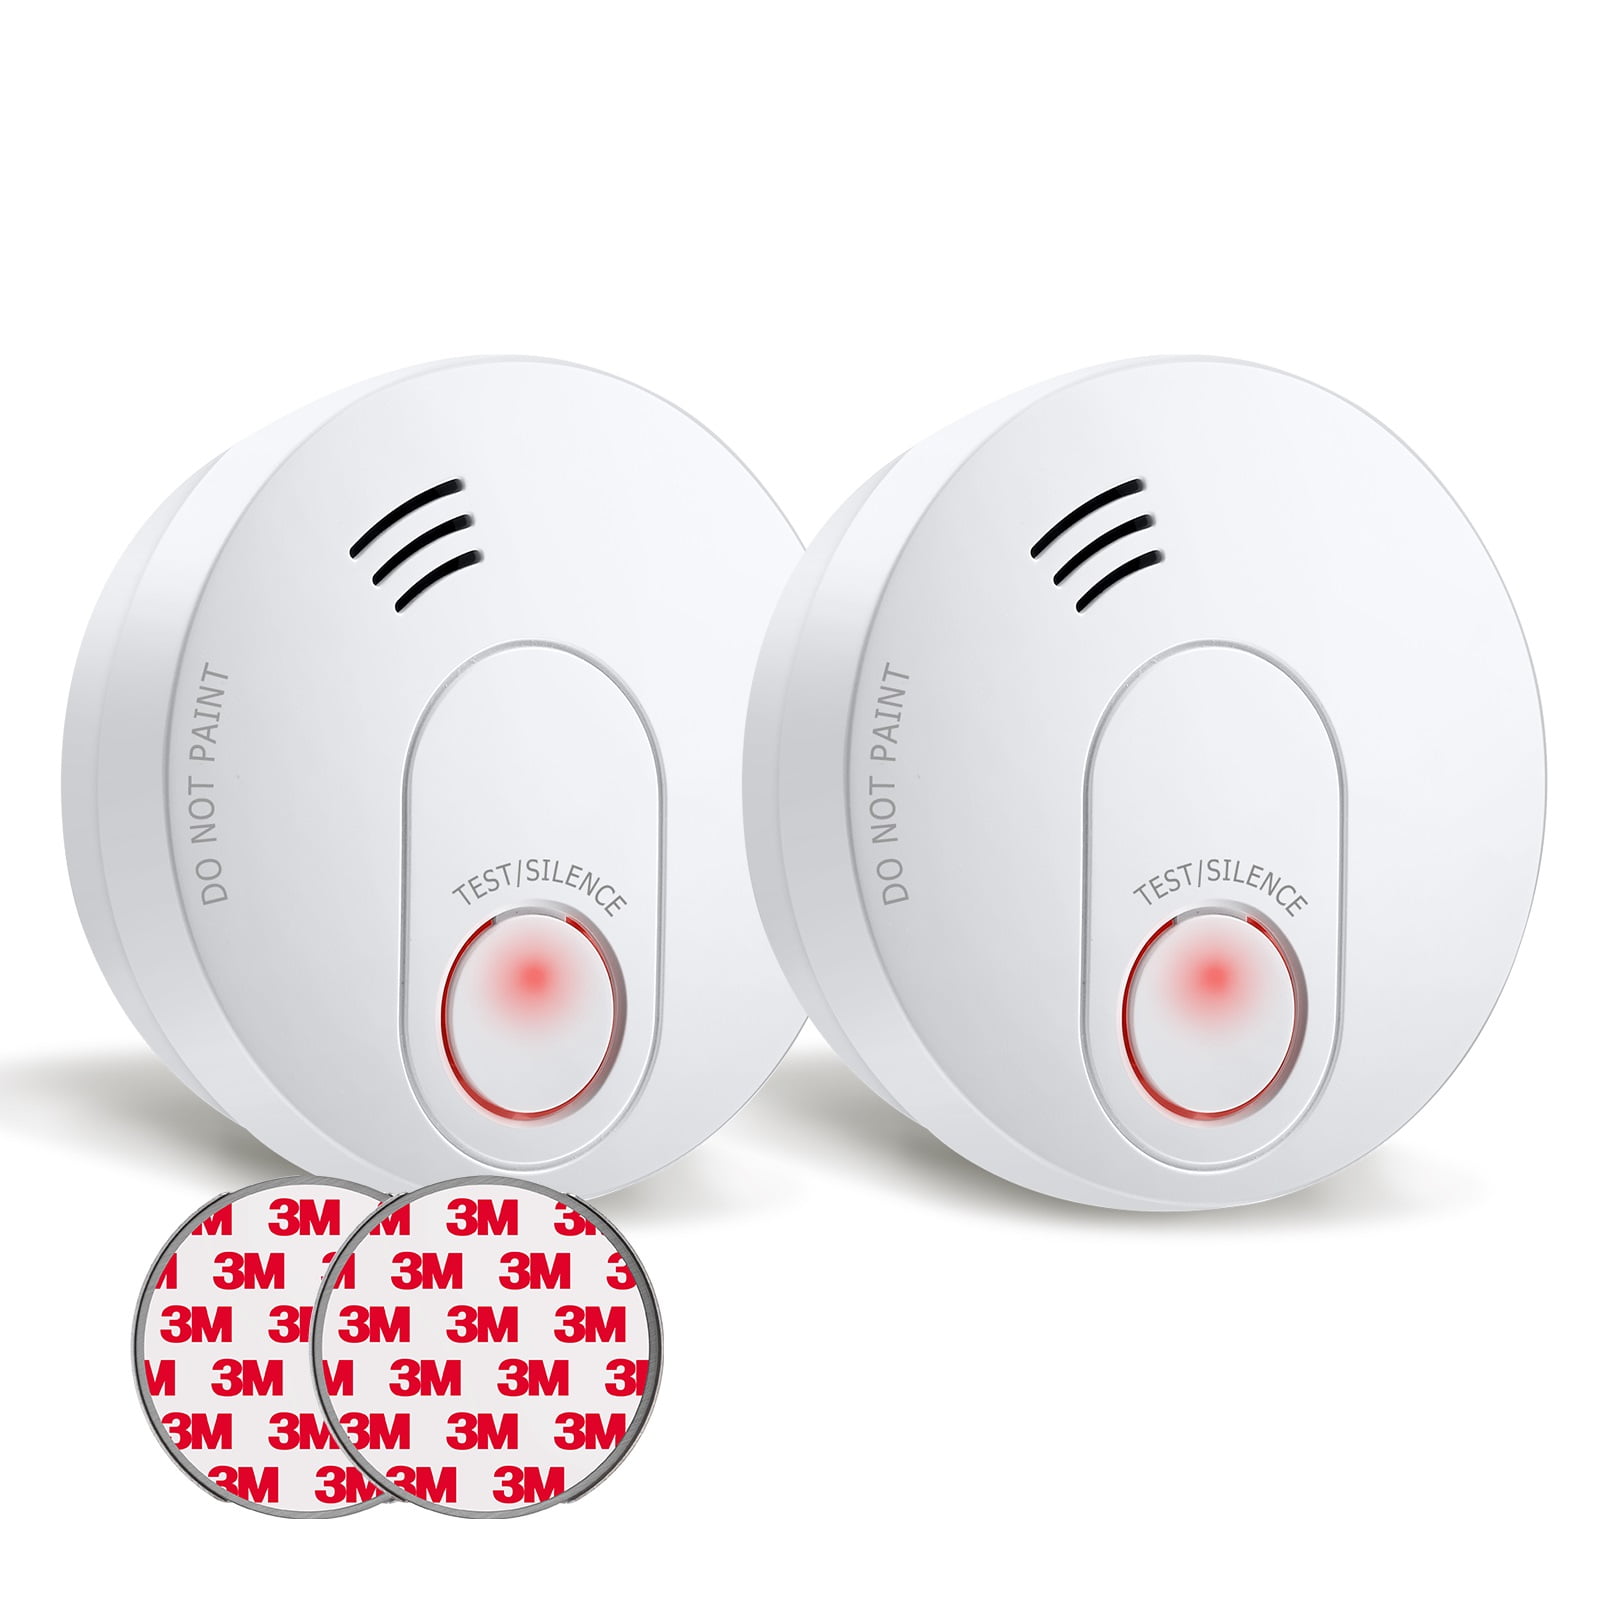 2 Pack Smoke Detector Fire Alarm Ionisation Photoelectric Sensor Easy to Install 